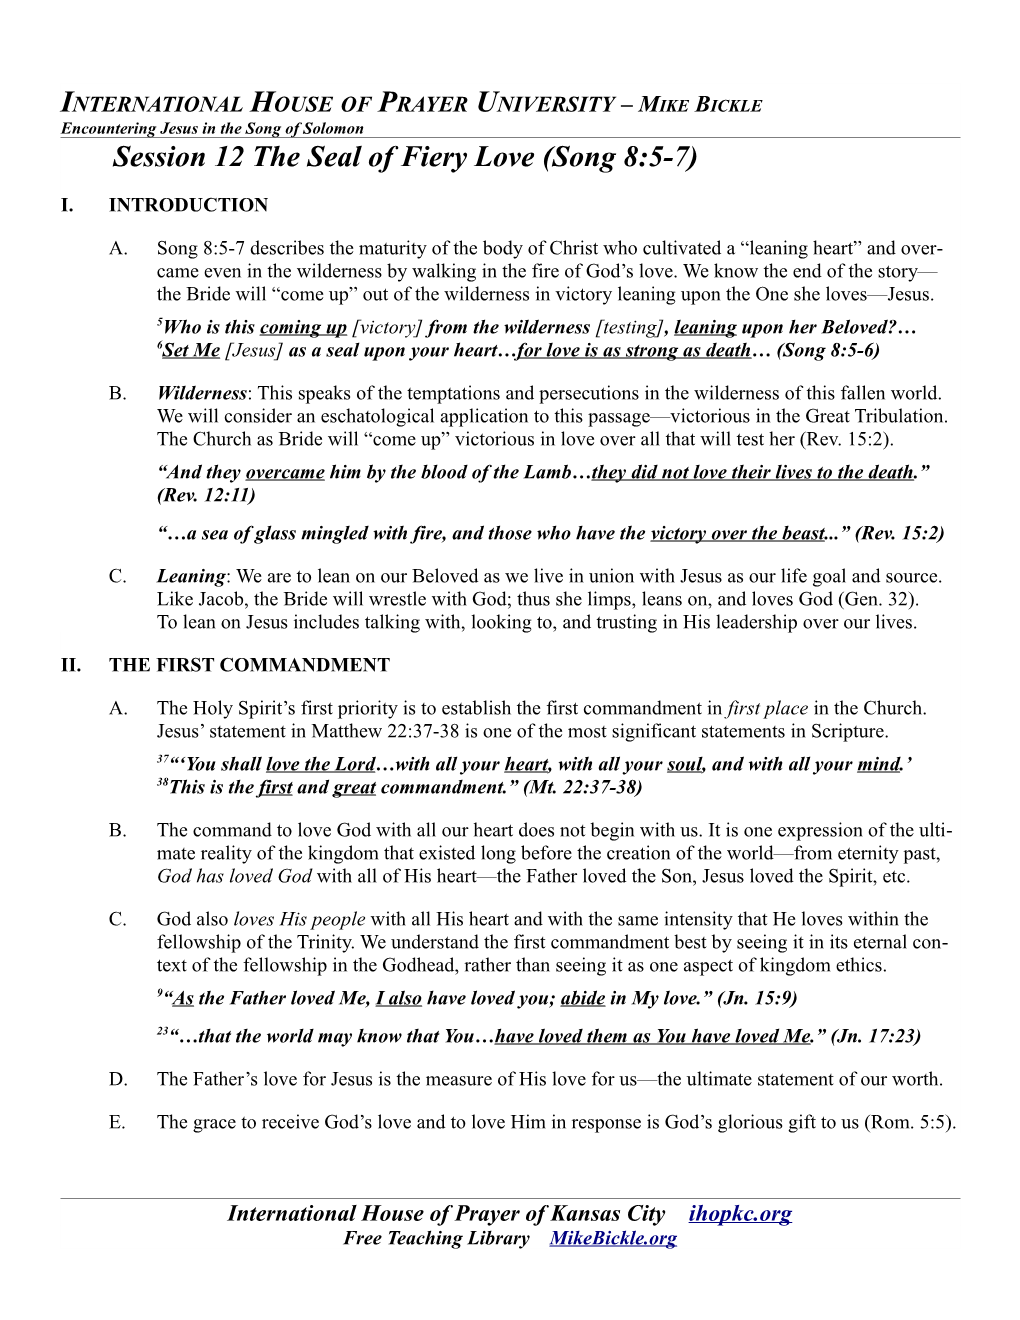 Session 12 the Seal of Fiery Love (Song 8:5-7)